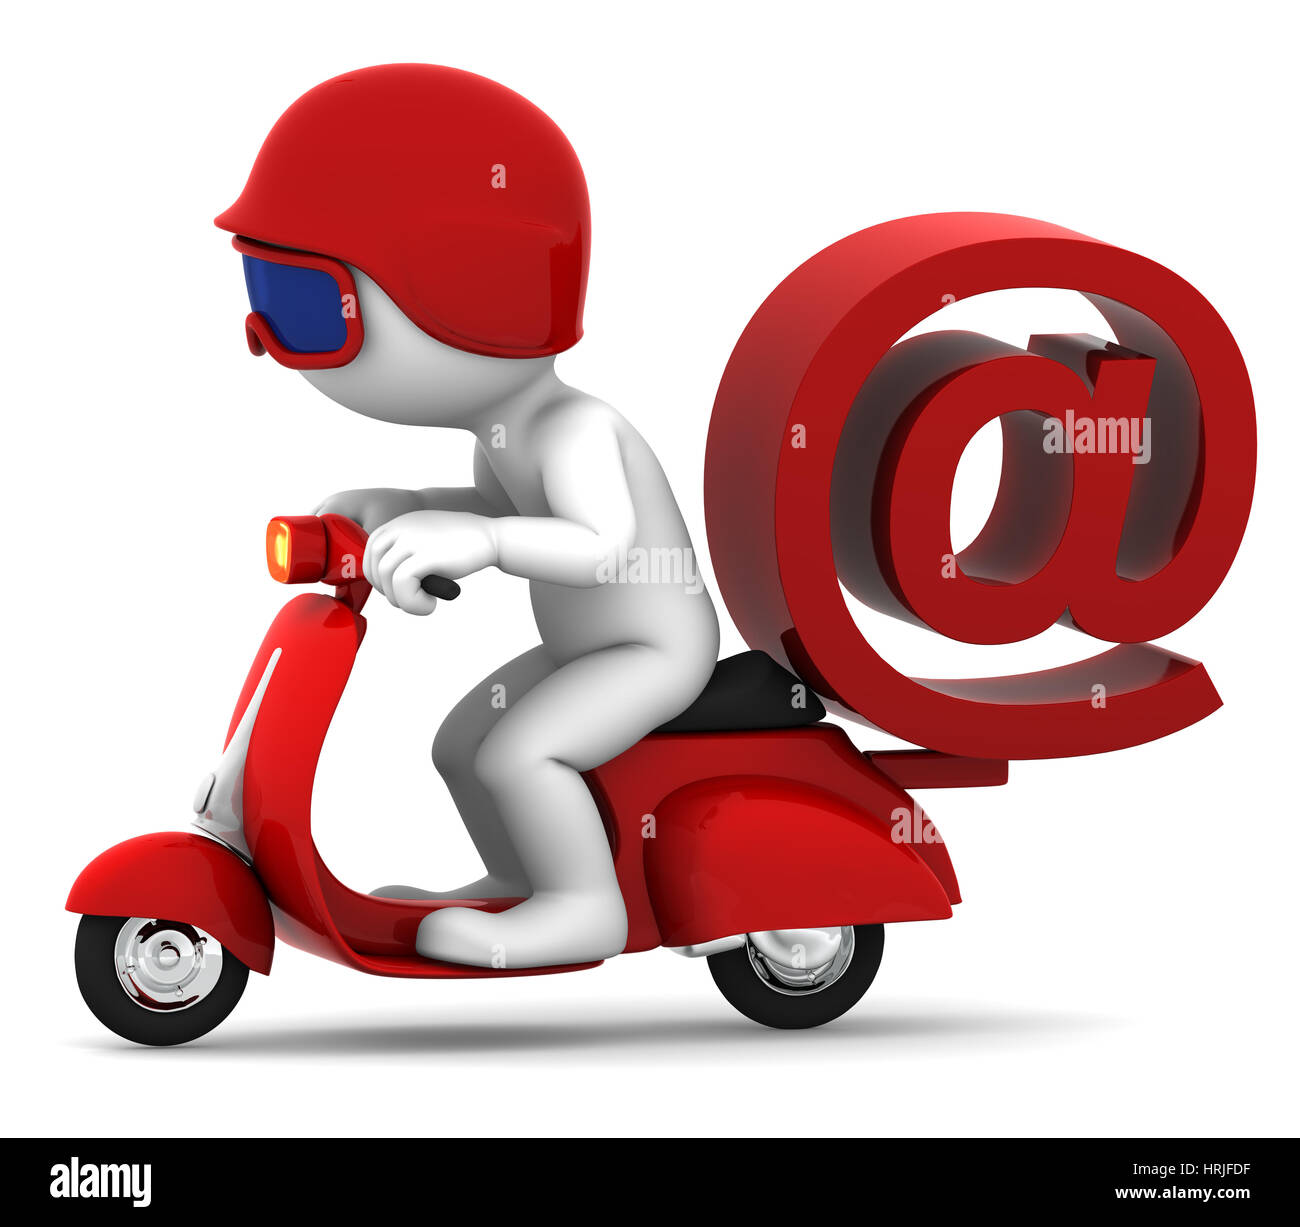 Person on scooter wit e-mail symbol. E-mail delivery concept. Isolated on white background Stock Photo